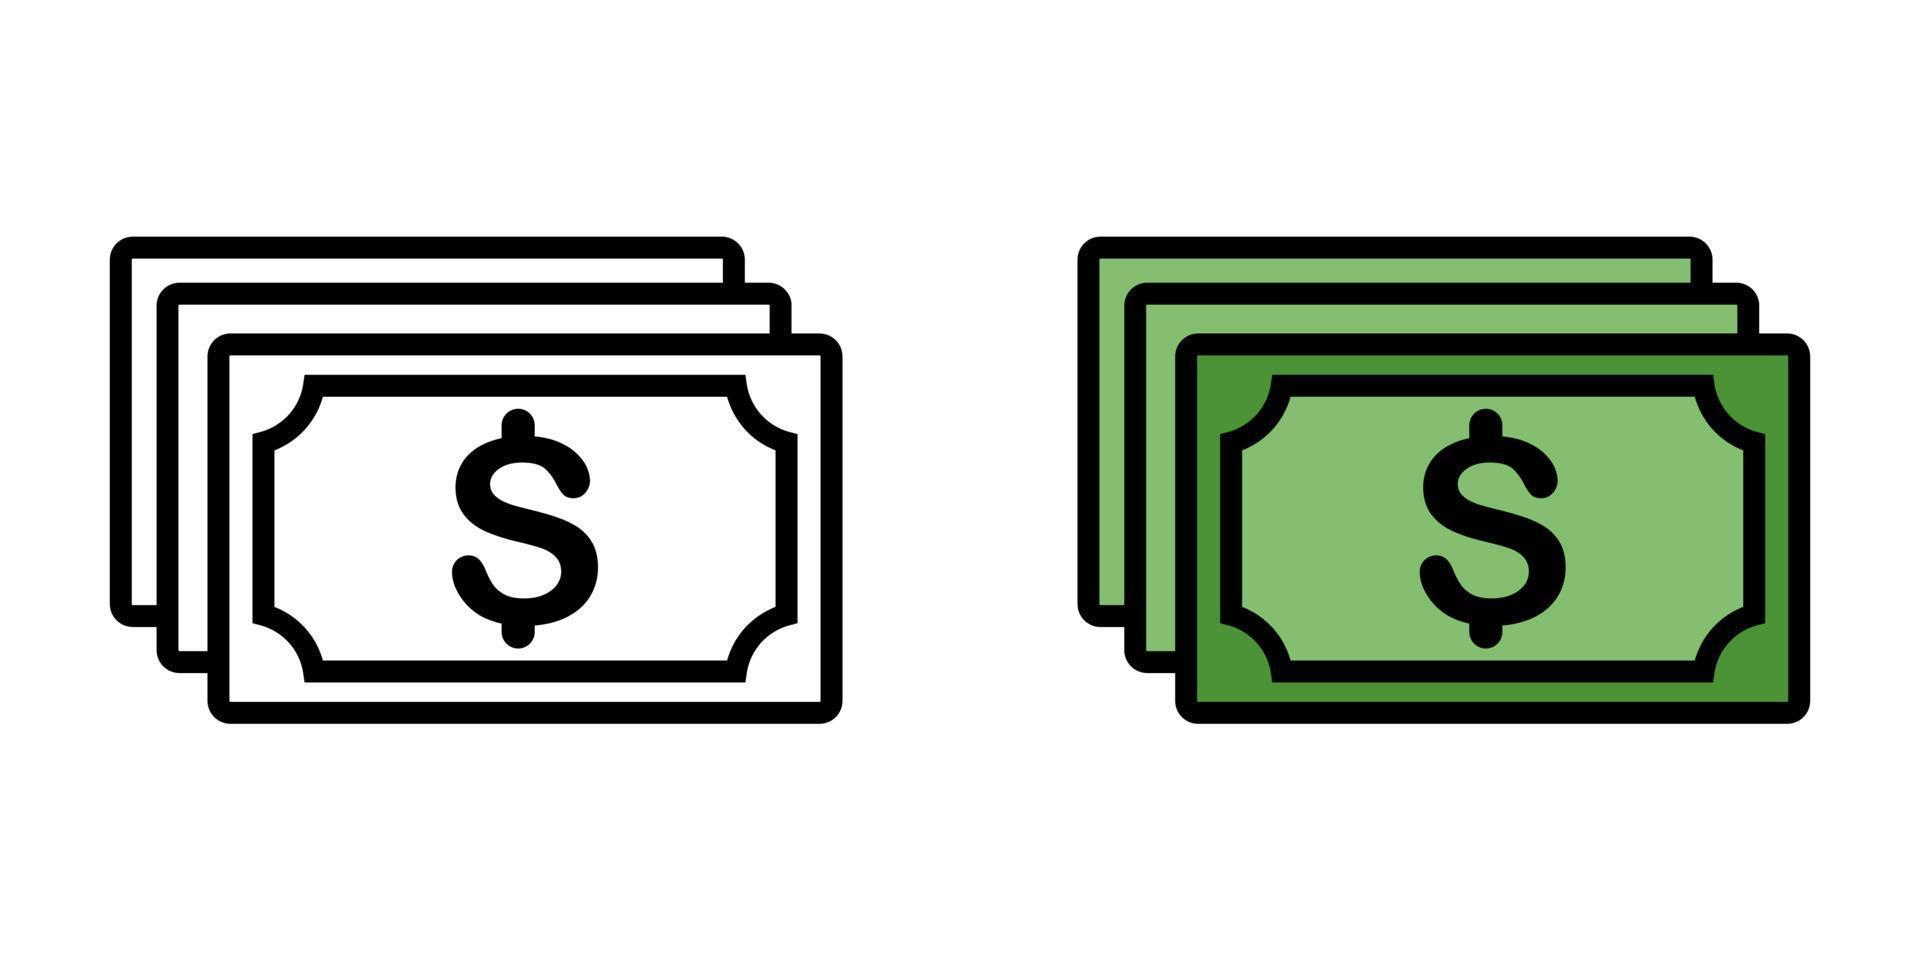 Illustration Vector Graphic of Cash, coin, money Icon